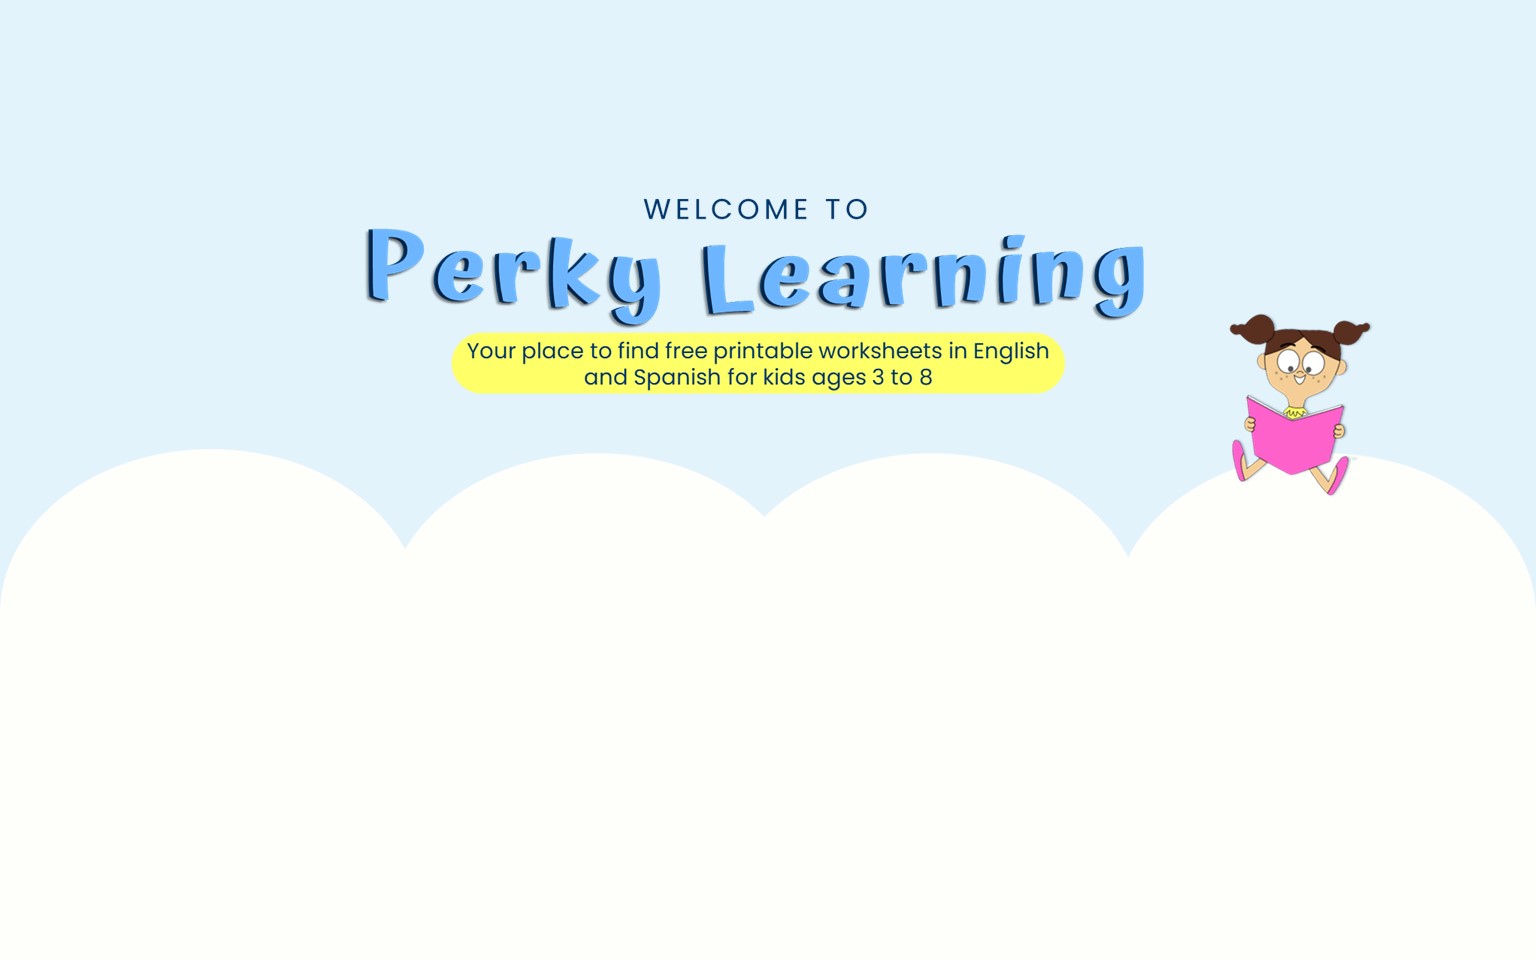 Perky Learning free English and Spanish printables worksheets for kids ages 3 to 8